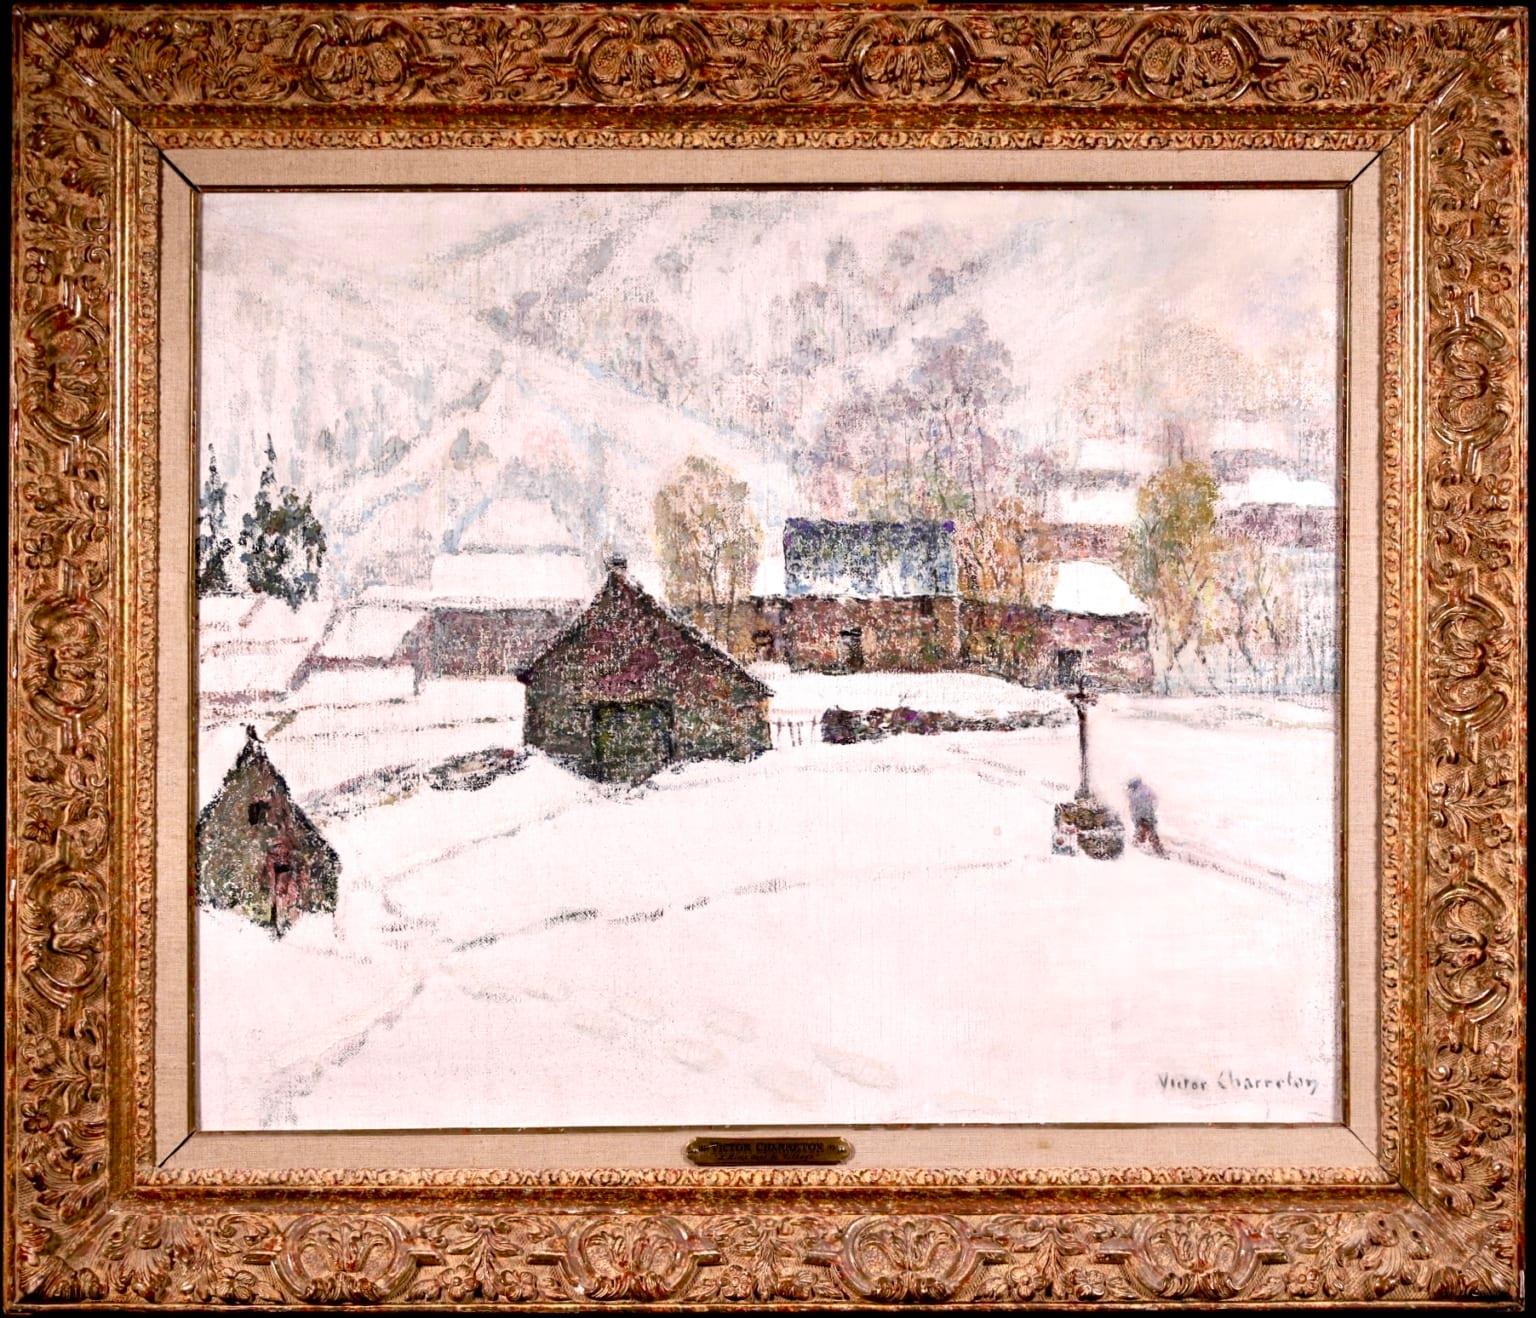 footsteps in the snow 1966